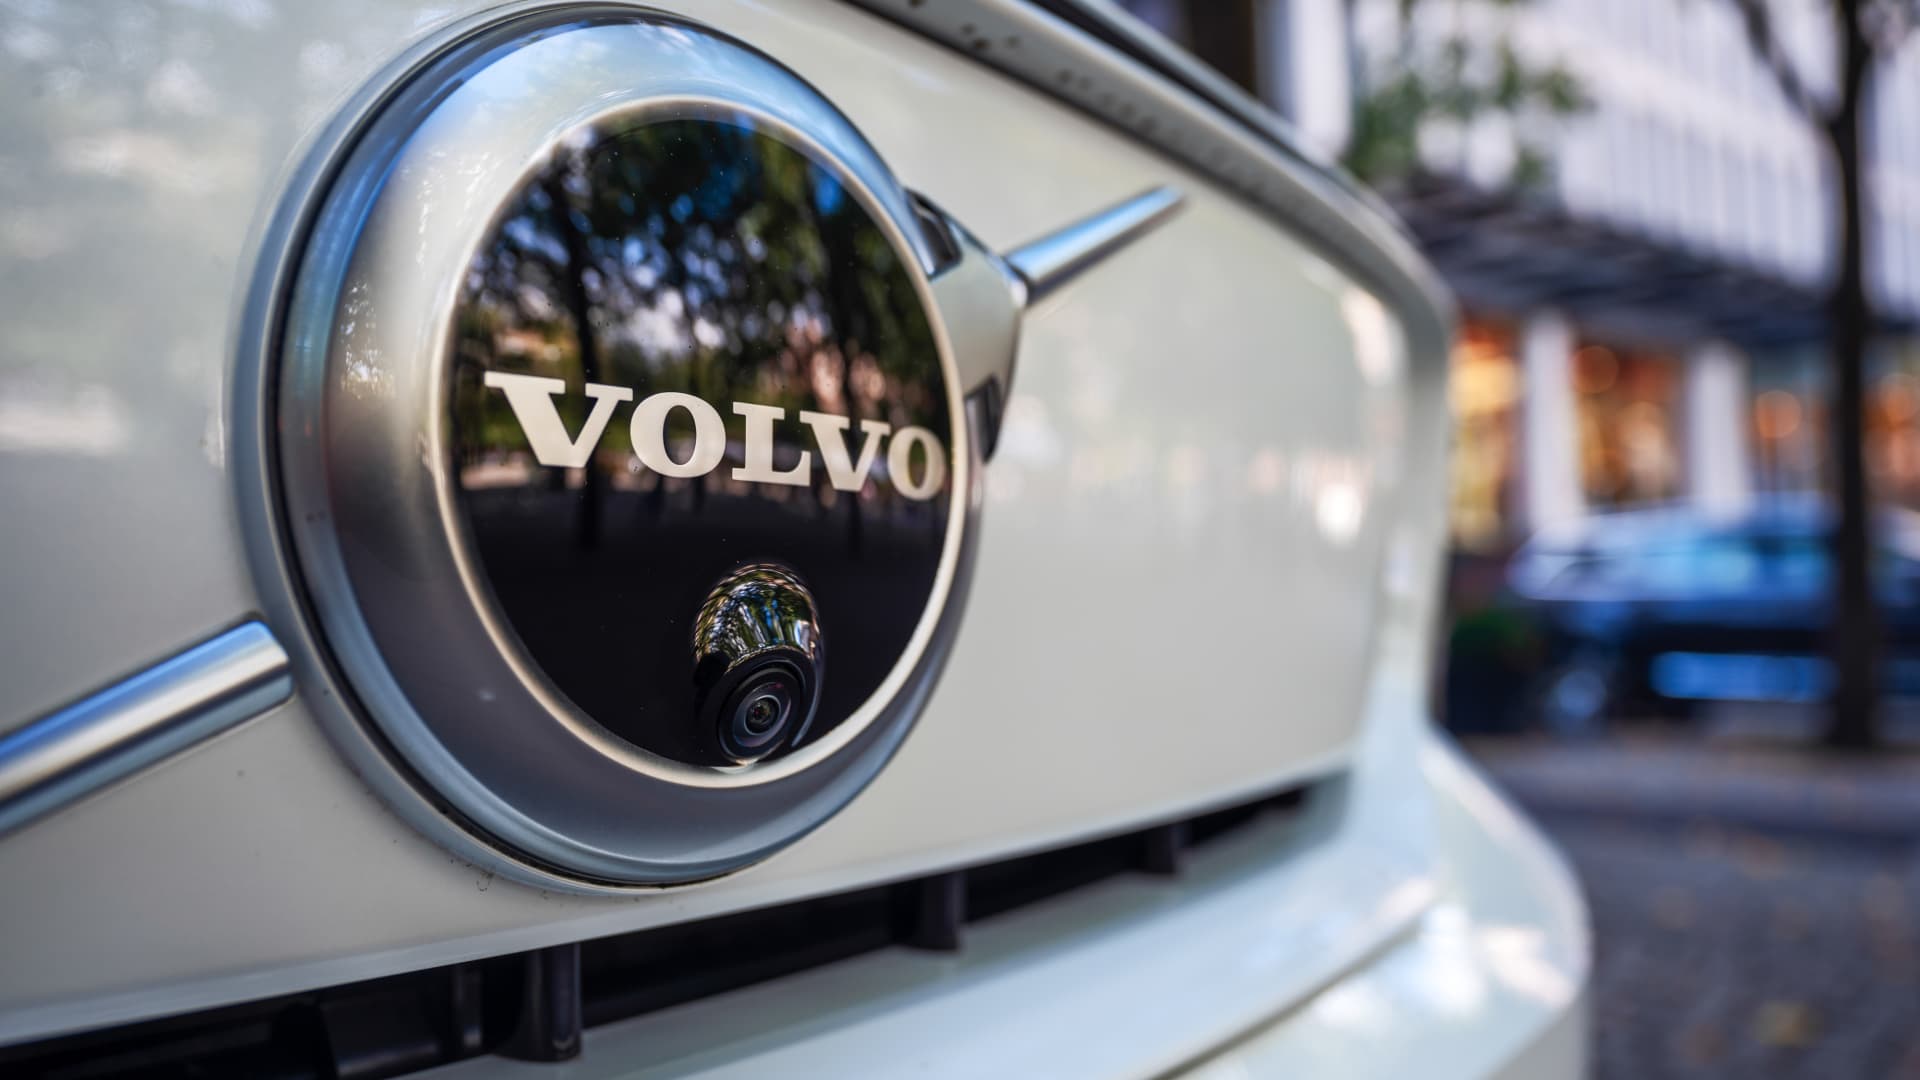 Volvo Cars CEO suggests the global chip shortage is easing